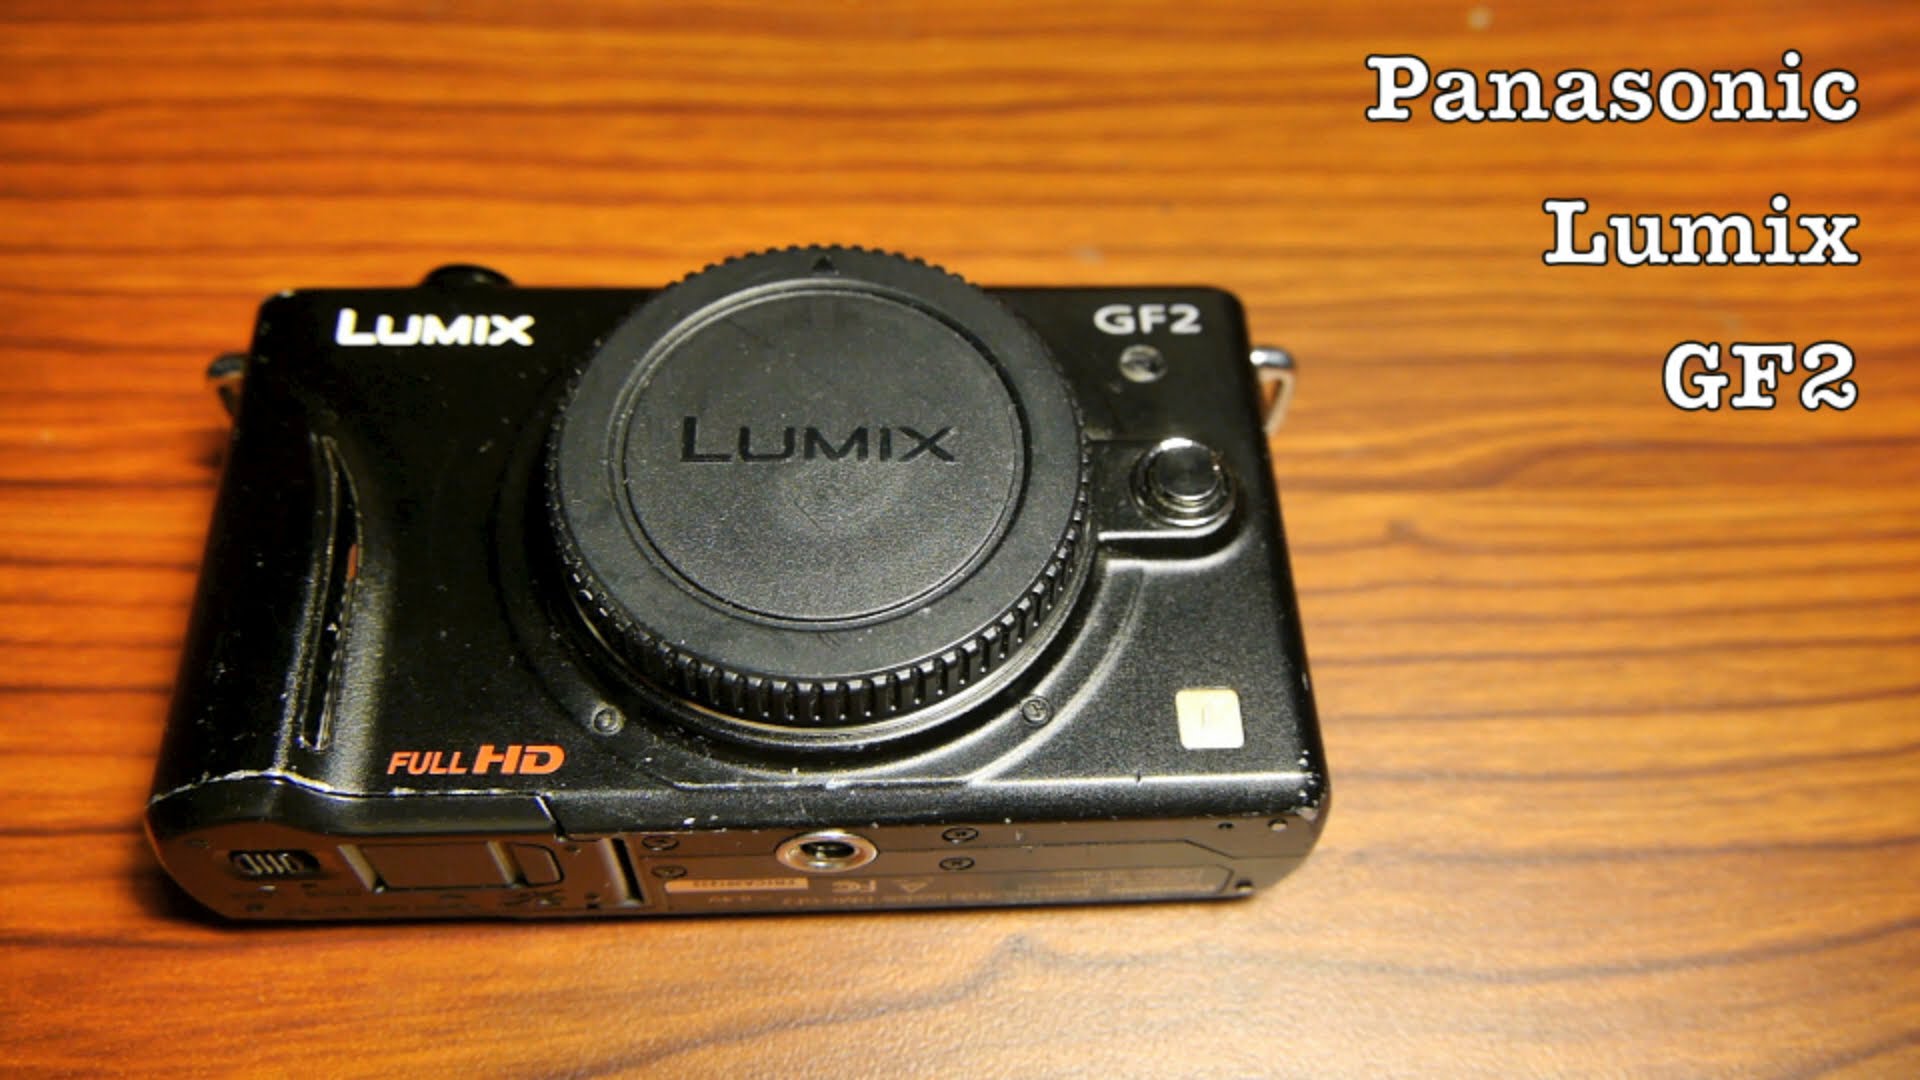 Panasonic GF2 from the Lumix DMC Camera Series w/ Mount For Micro Four Thirds Lenses & Lens Adapters